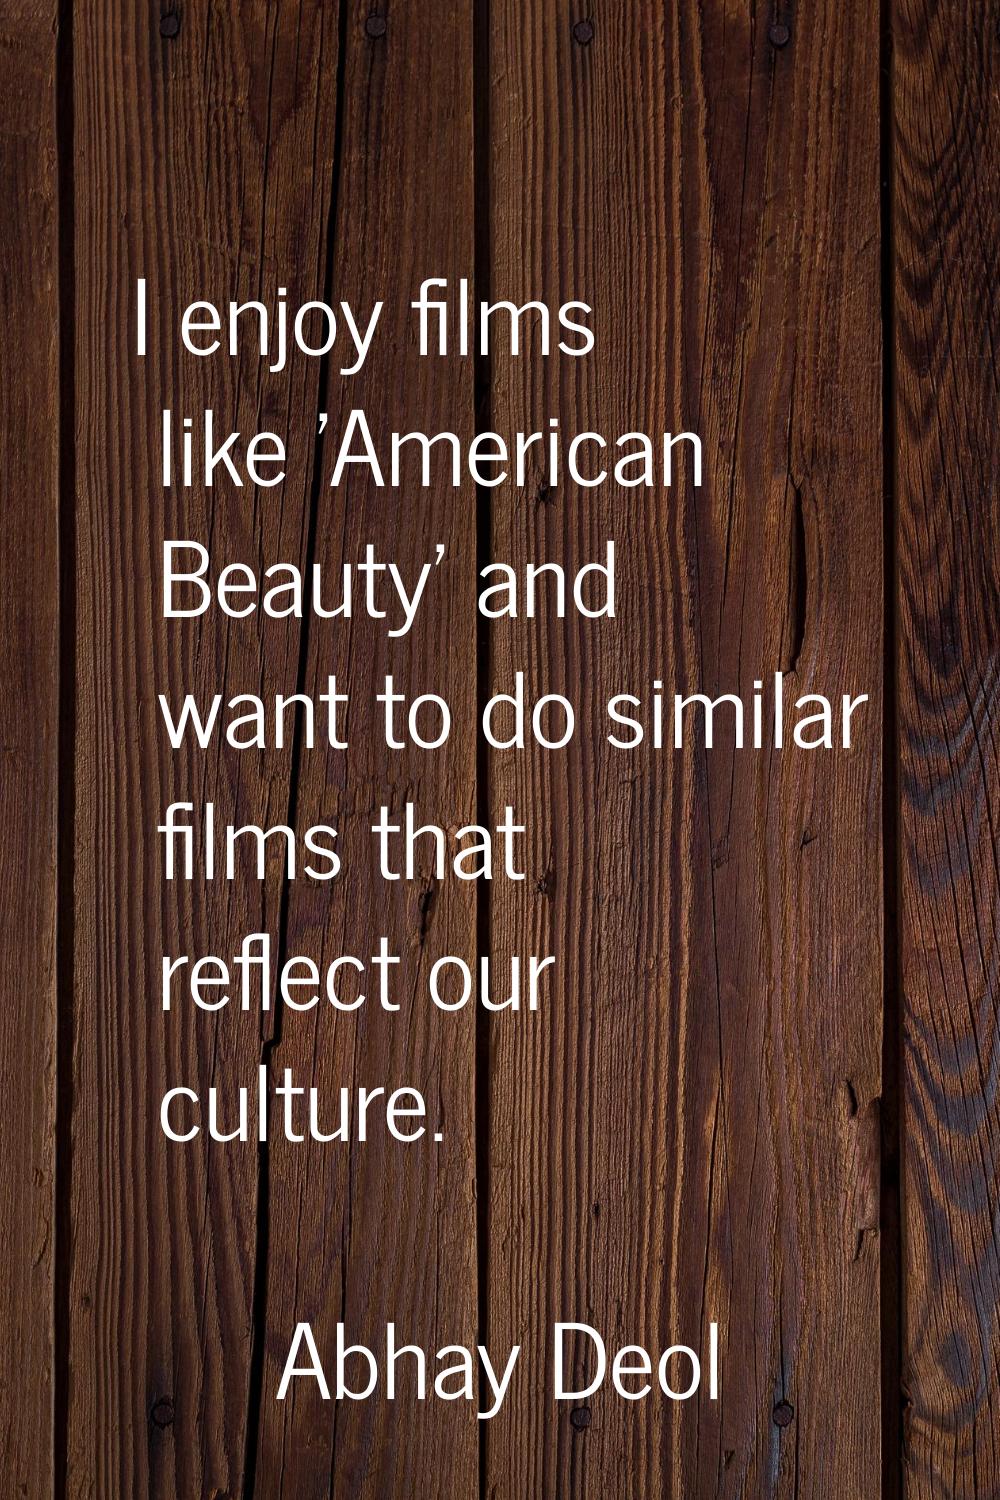 I enjoy films like 'American Beauty' and want to do similar films that reflect our culture.